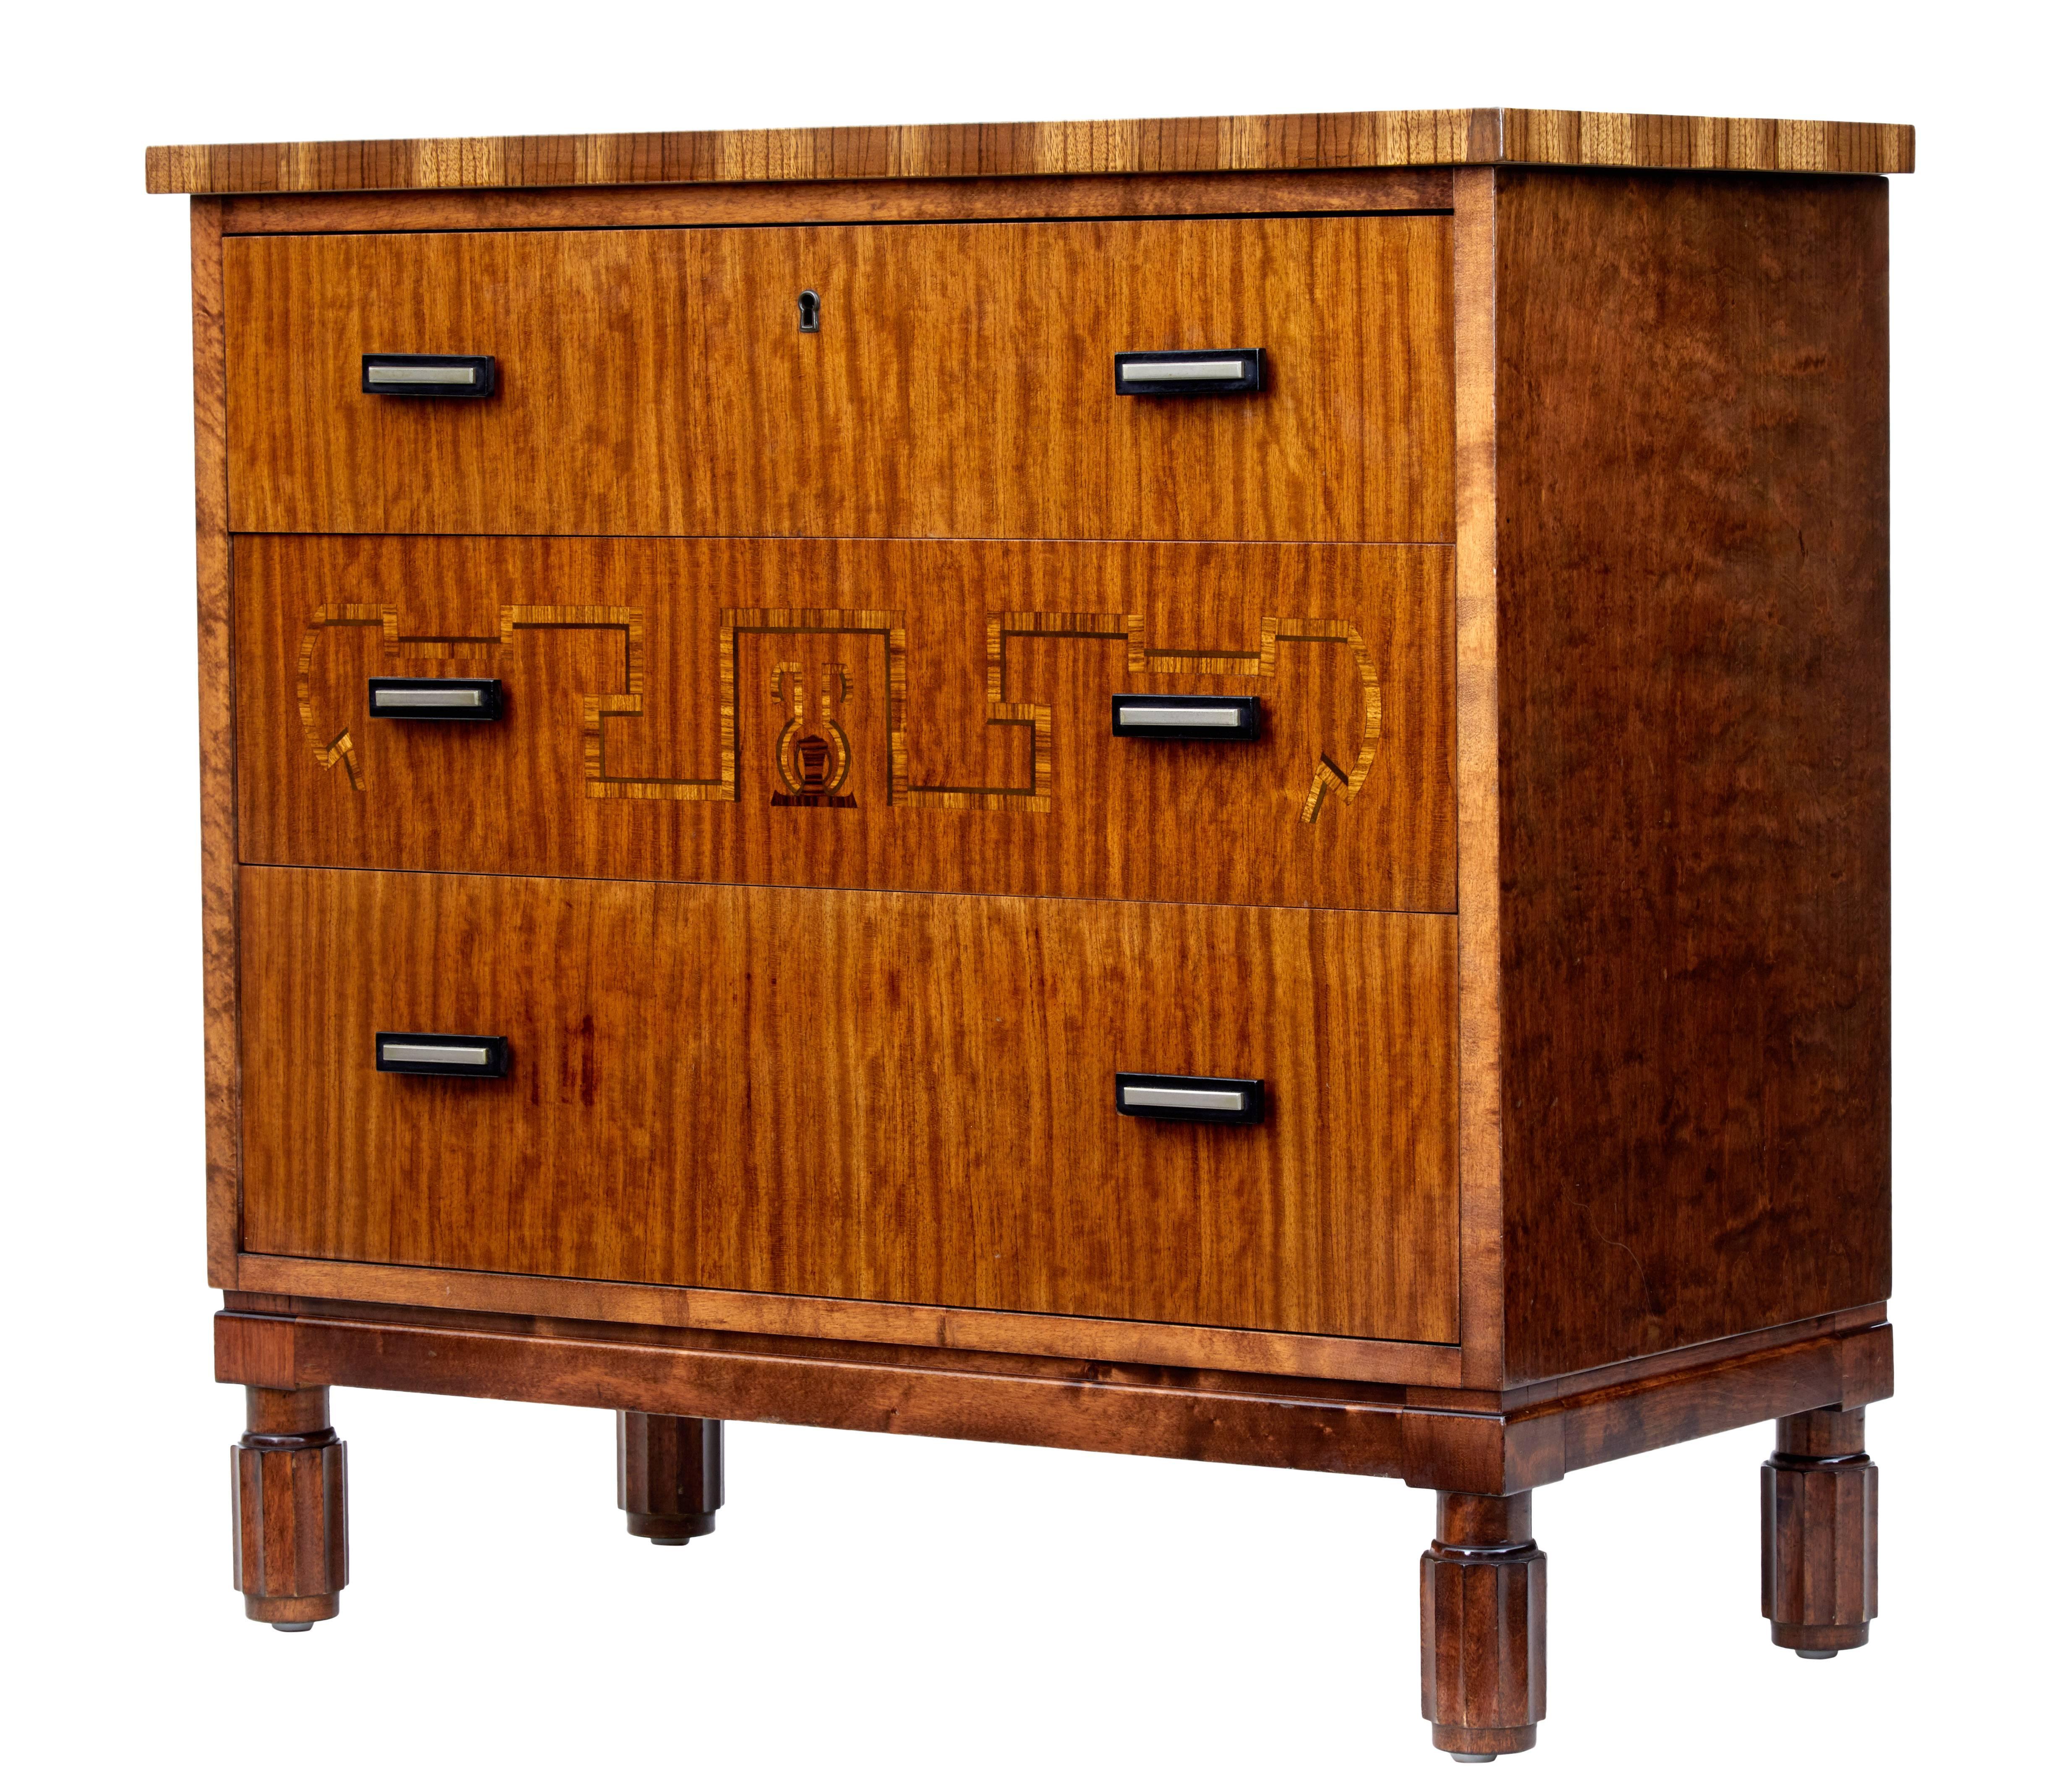 Good quality Scandinavian small chest of drawers in the Art Deco taste, circa 1950.

Three graduating mahogany drawers, middle drawer with inlay. Top drawer with working lock and key.

Fitted with ebonized wood and steel handles.

Standing on